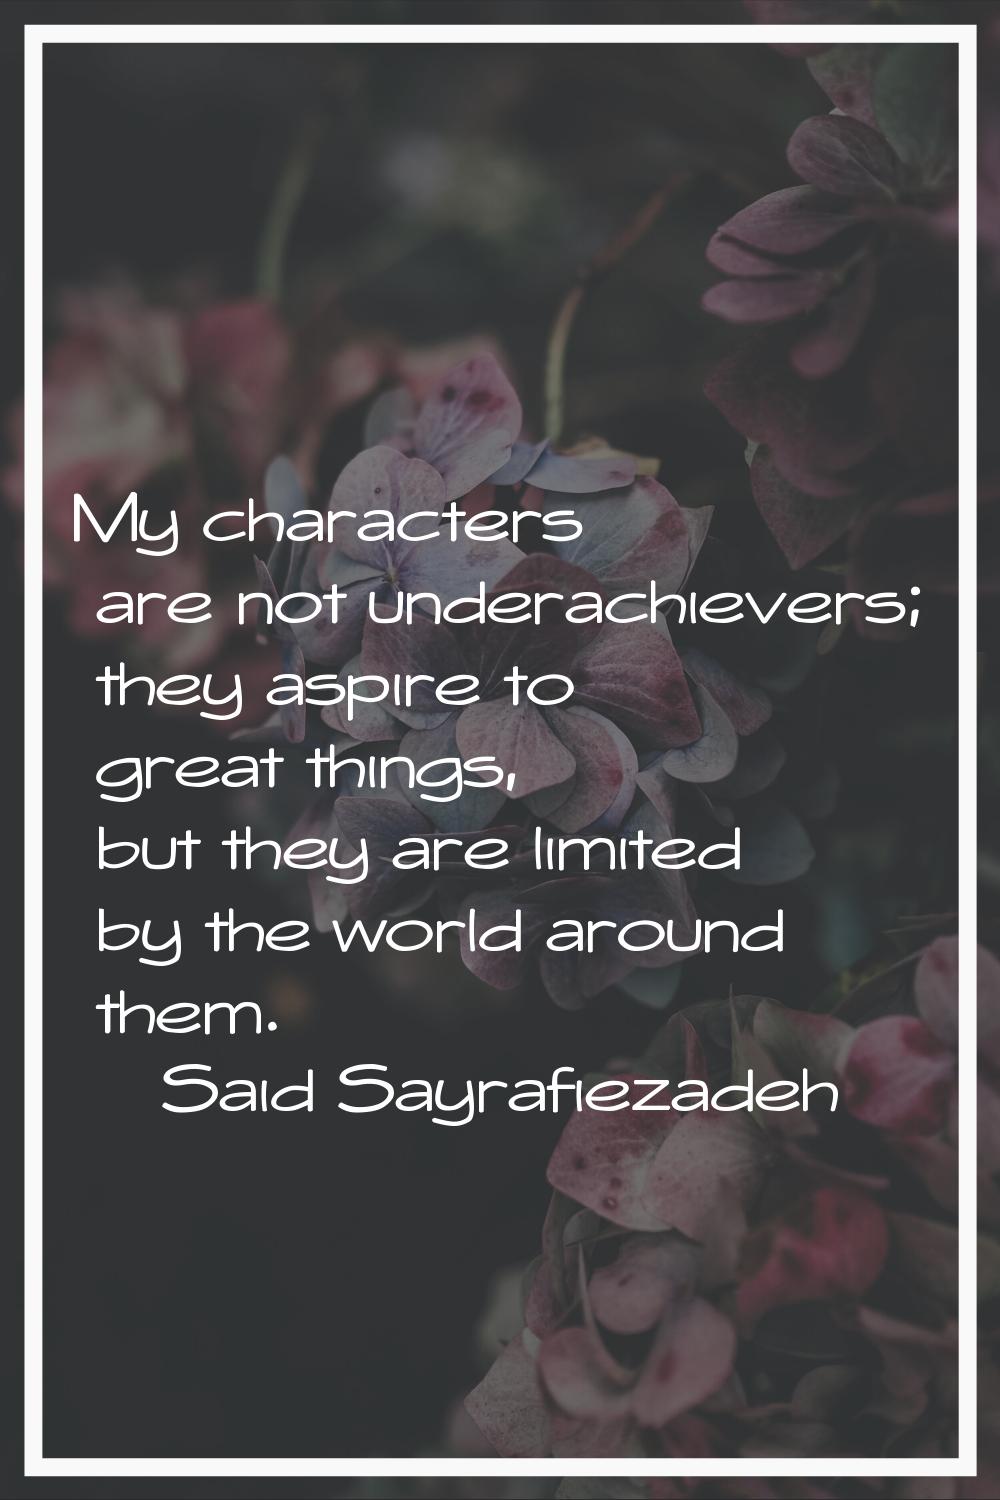 My characters are not underachievers; they aspire to great things, but they are limited by the worl